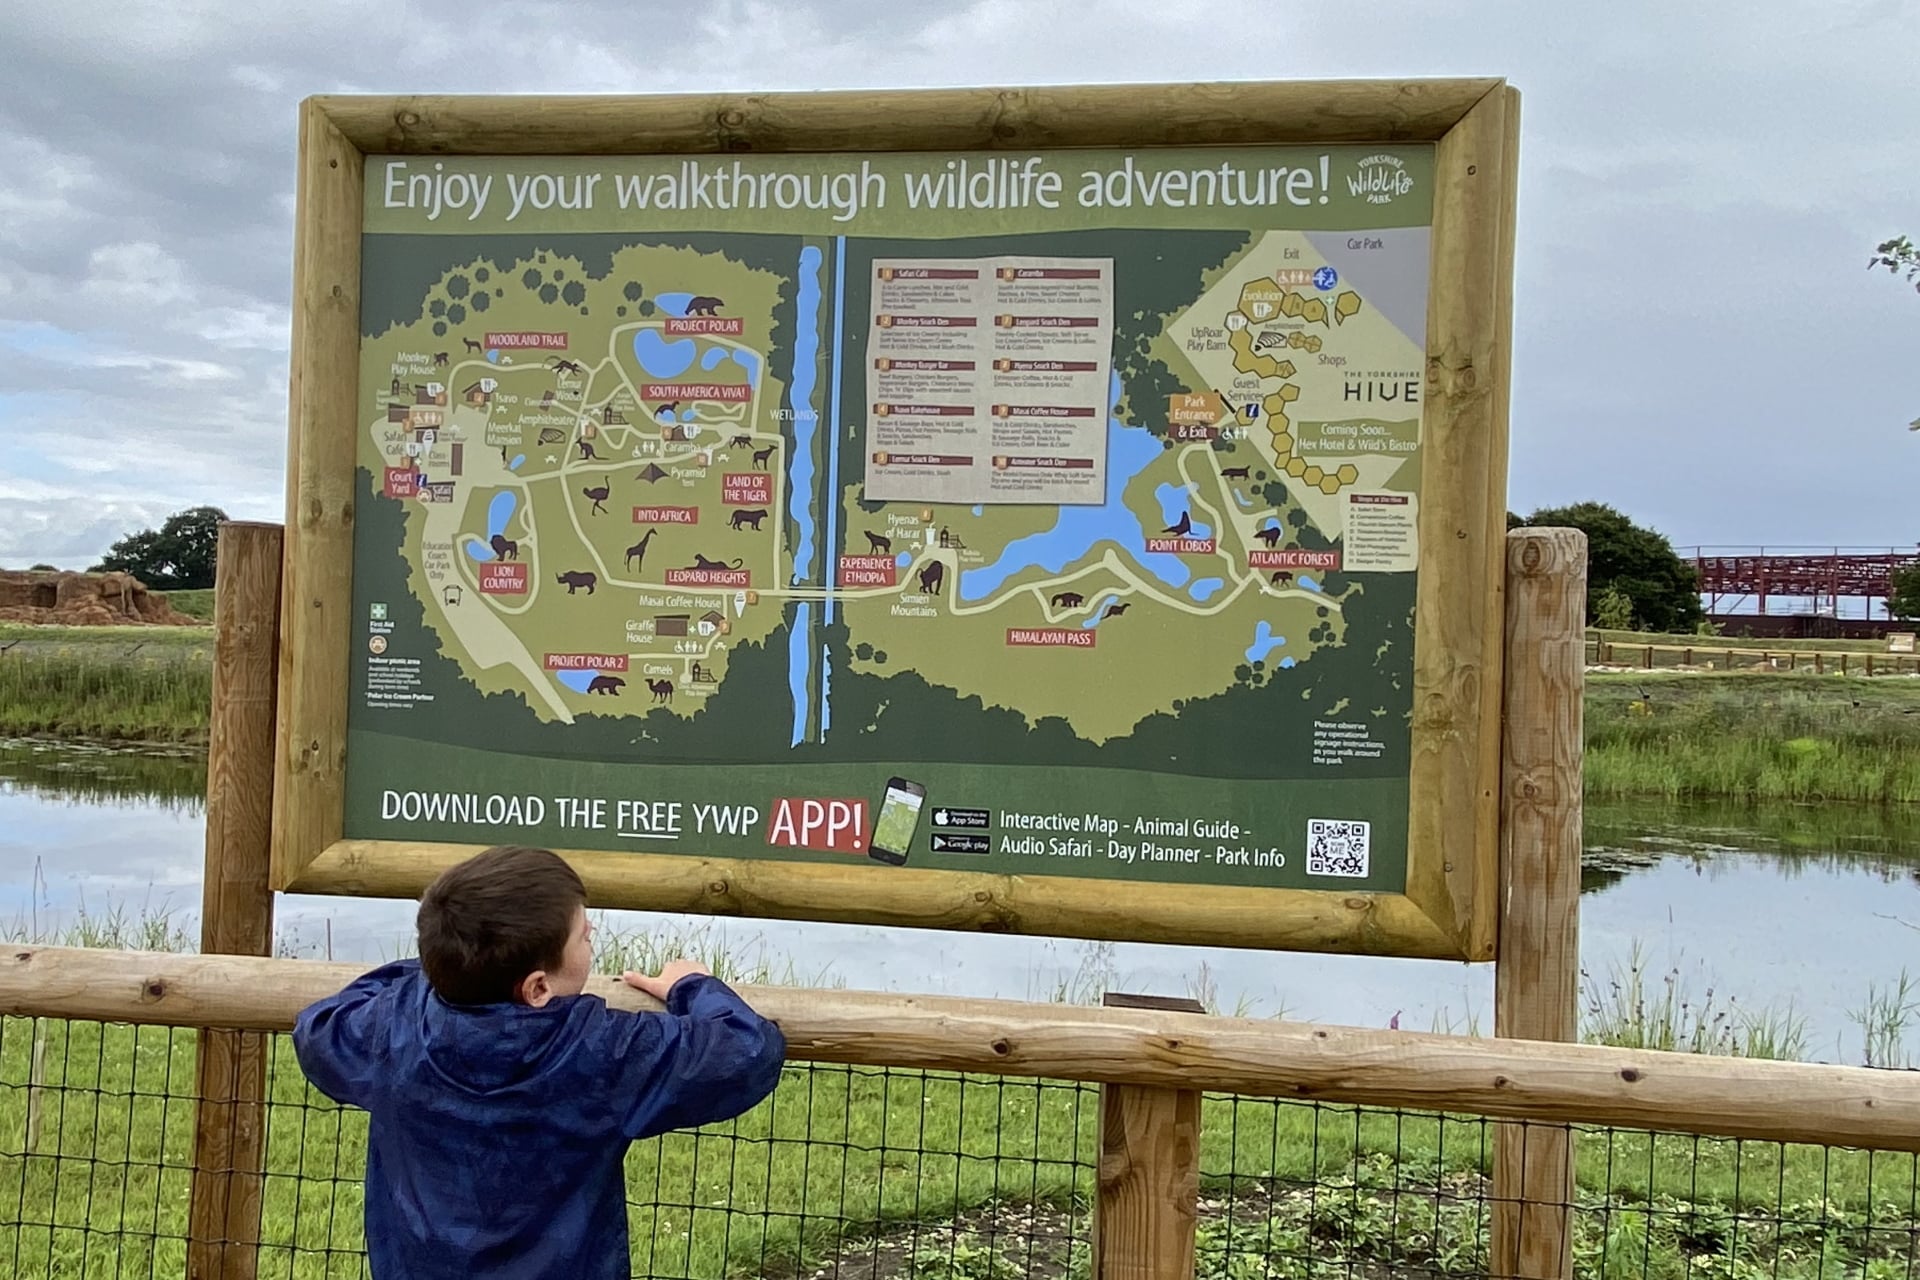 Half-Price Entry to Yorkshire Wildlife Park | Attractions Near Me